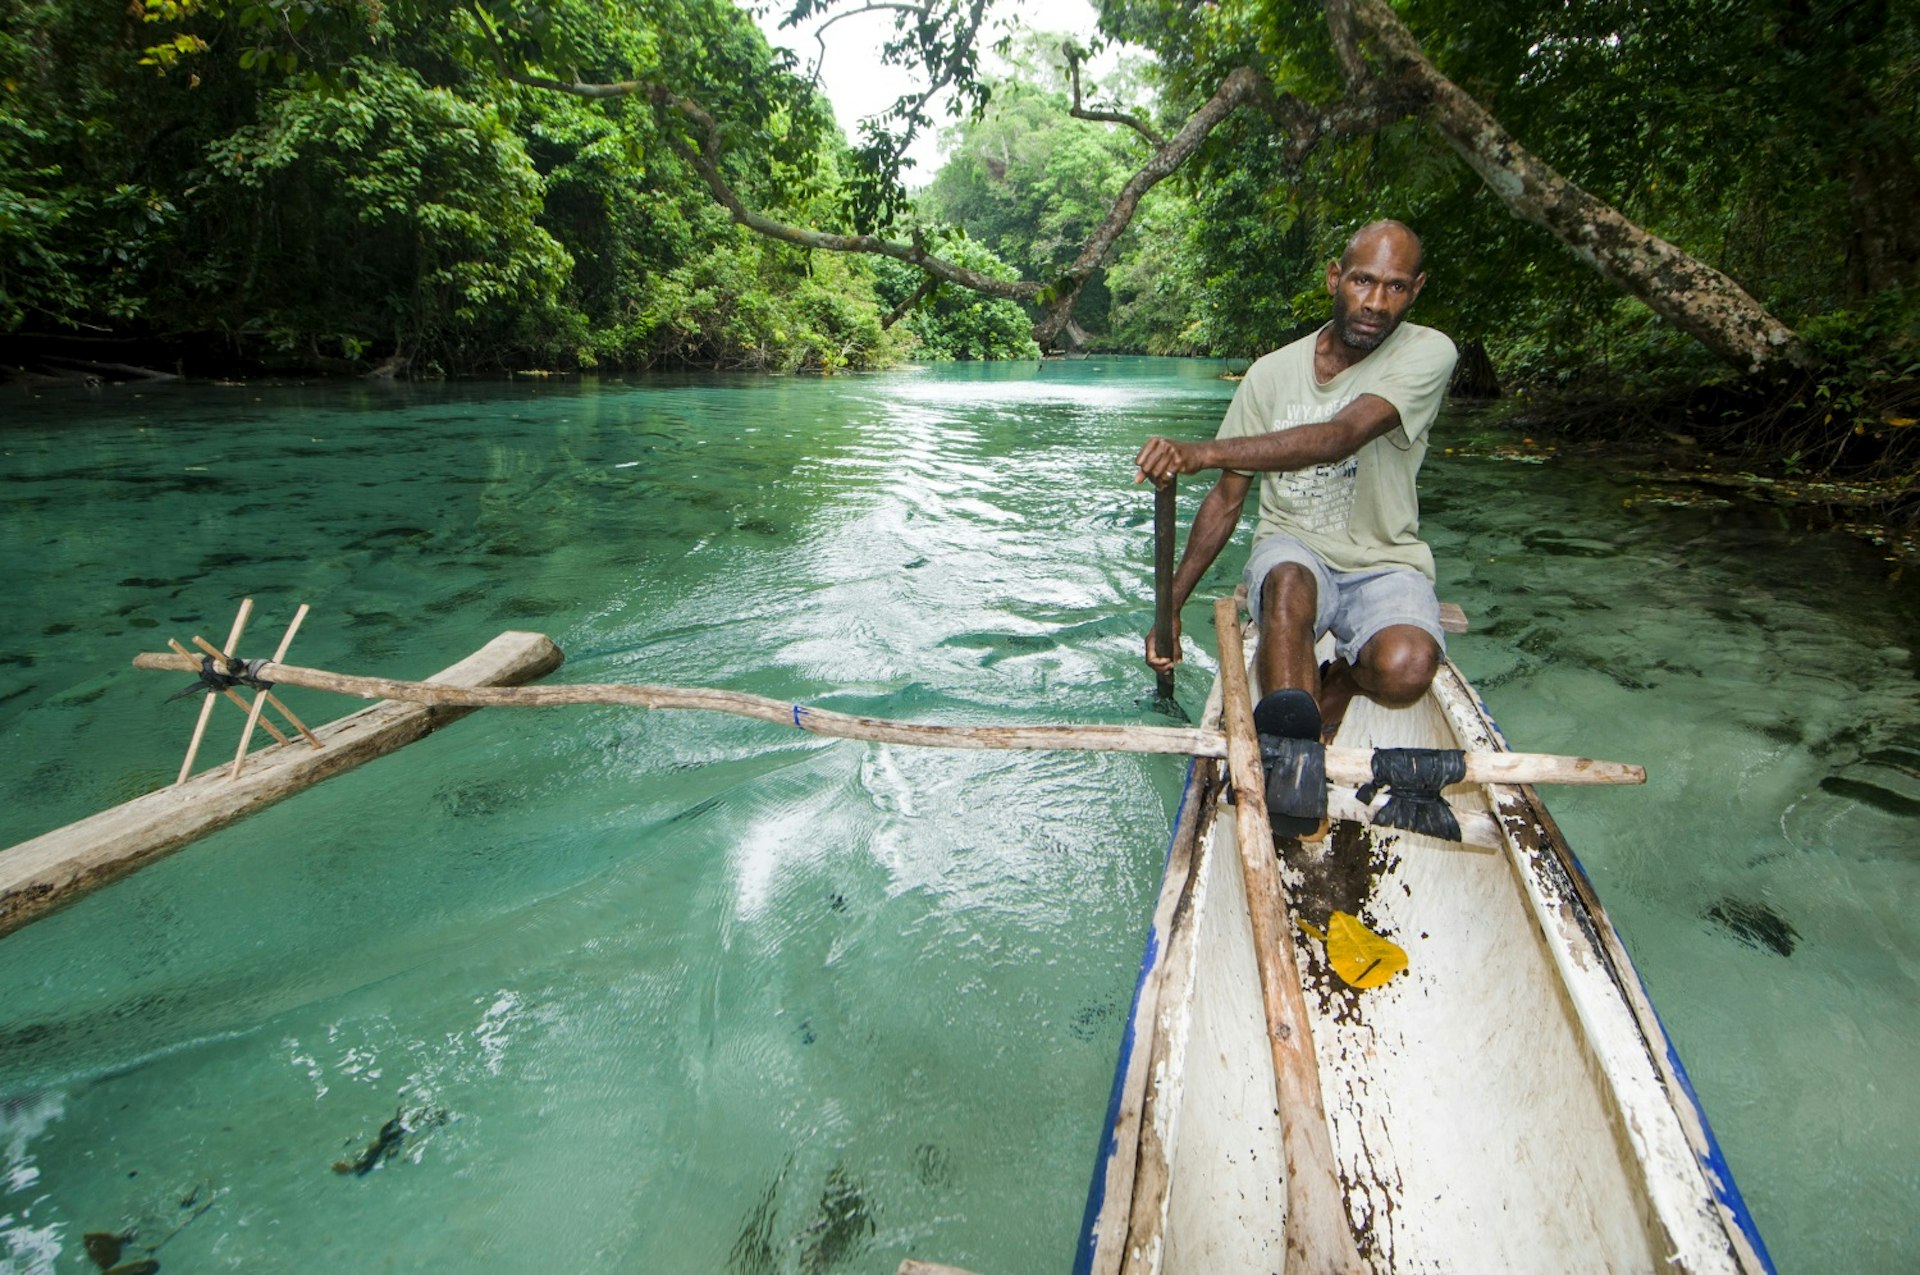 Be guided down river in an outrigger canoe © Paul Harding / Lonely Planet